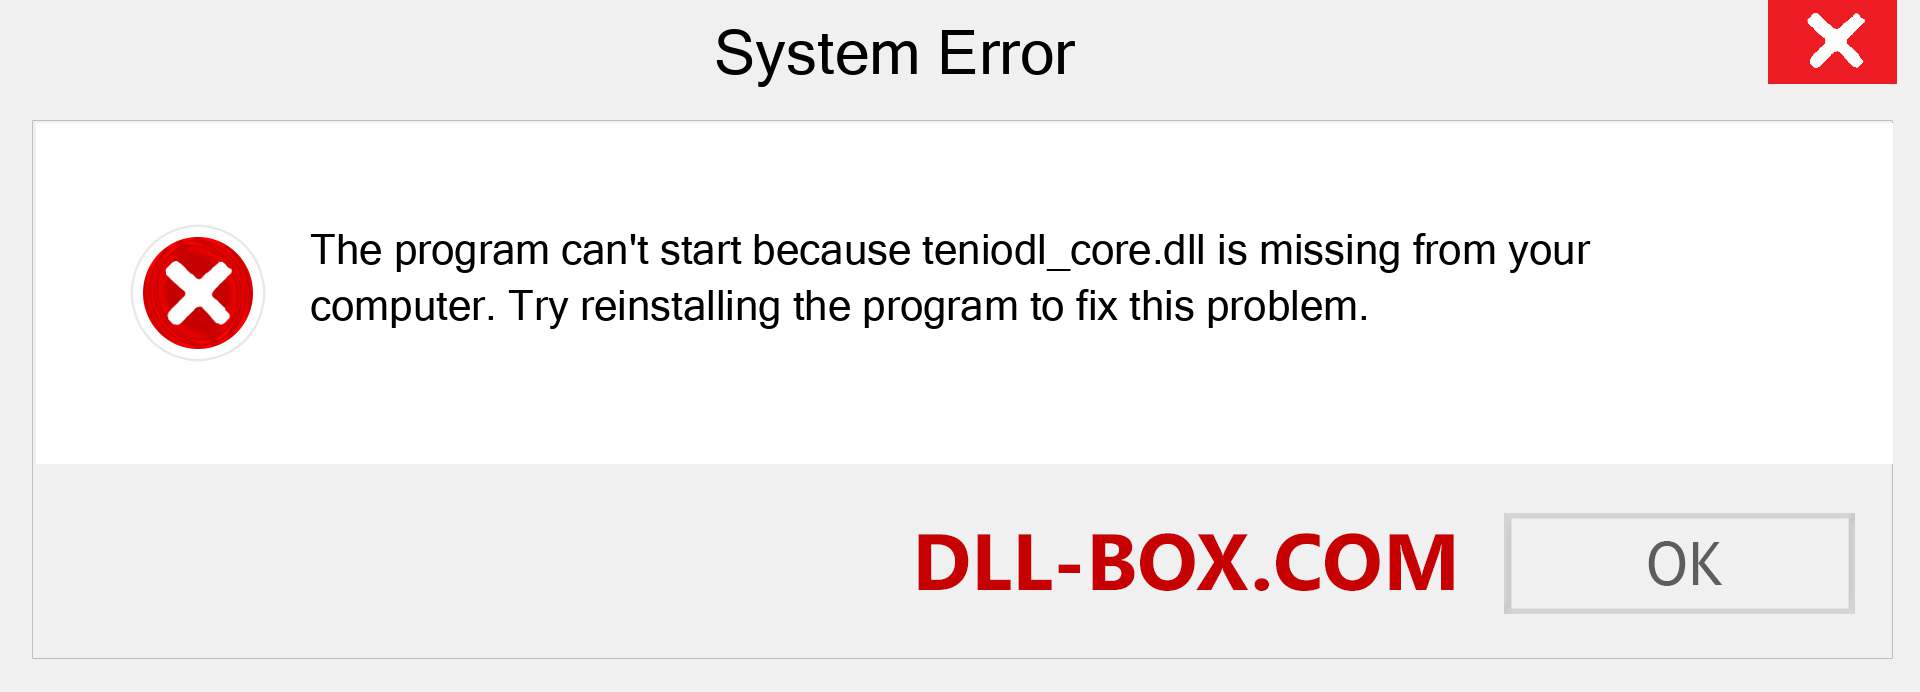  teniodl_core.dll file is missing?. Download for Windows 7, 8, 10 - Fix  teniodl_core dll Missing Error on Windows, photos, images